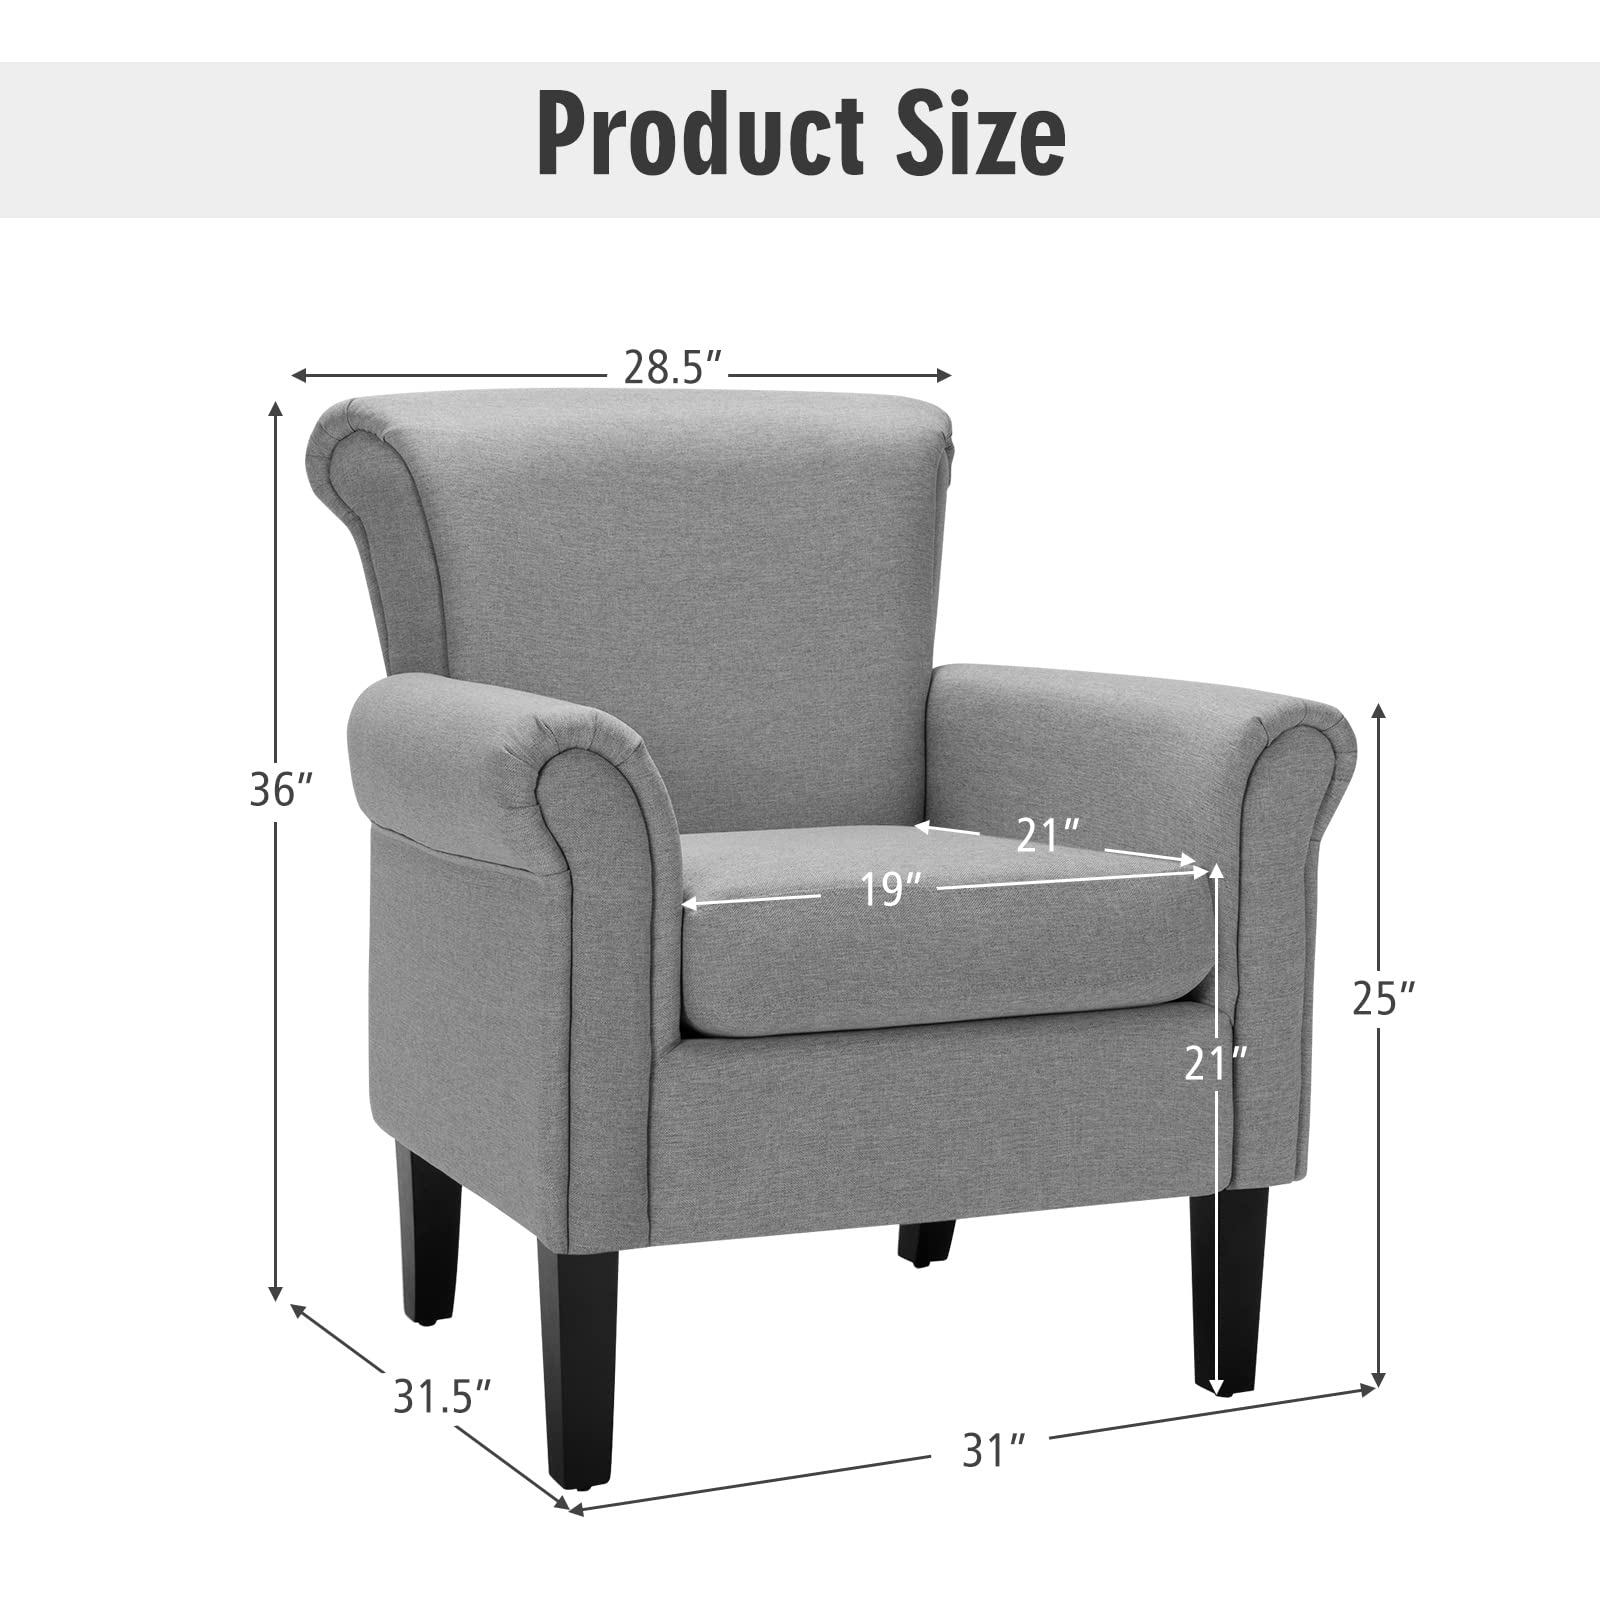 Giantex Modern Fabric Accent Chair, Comfy Living Room Chair w/Adjustable Foot Pads